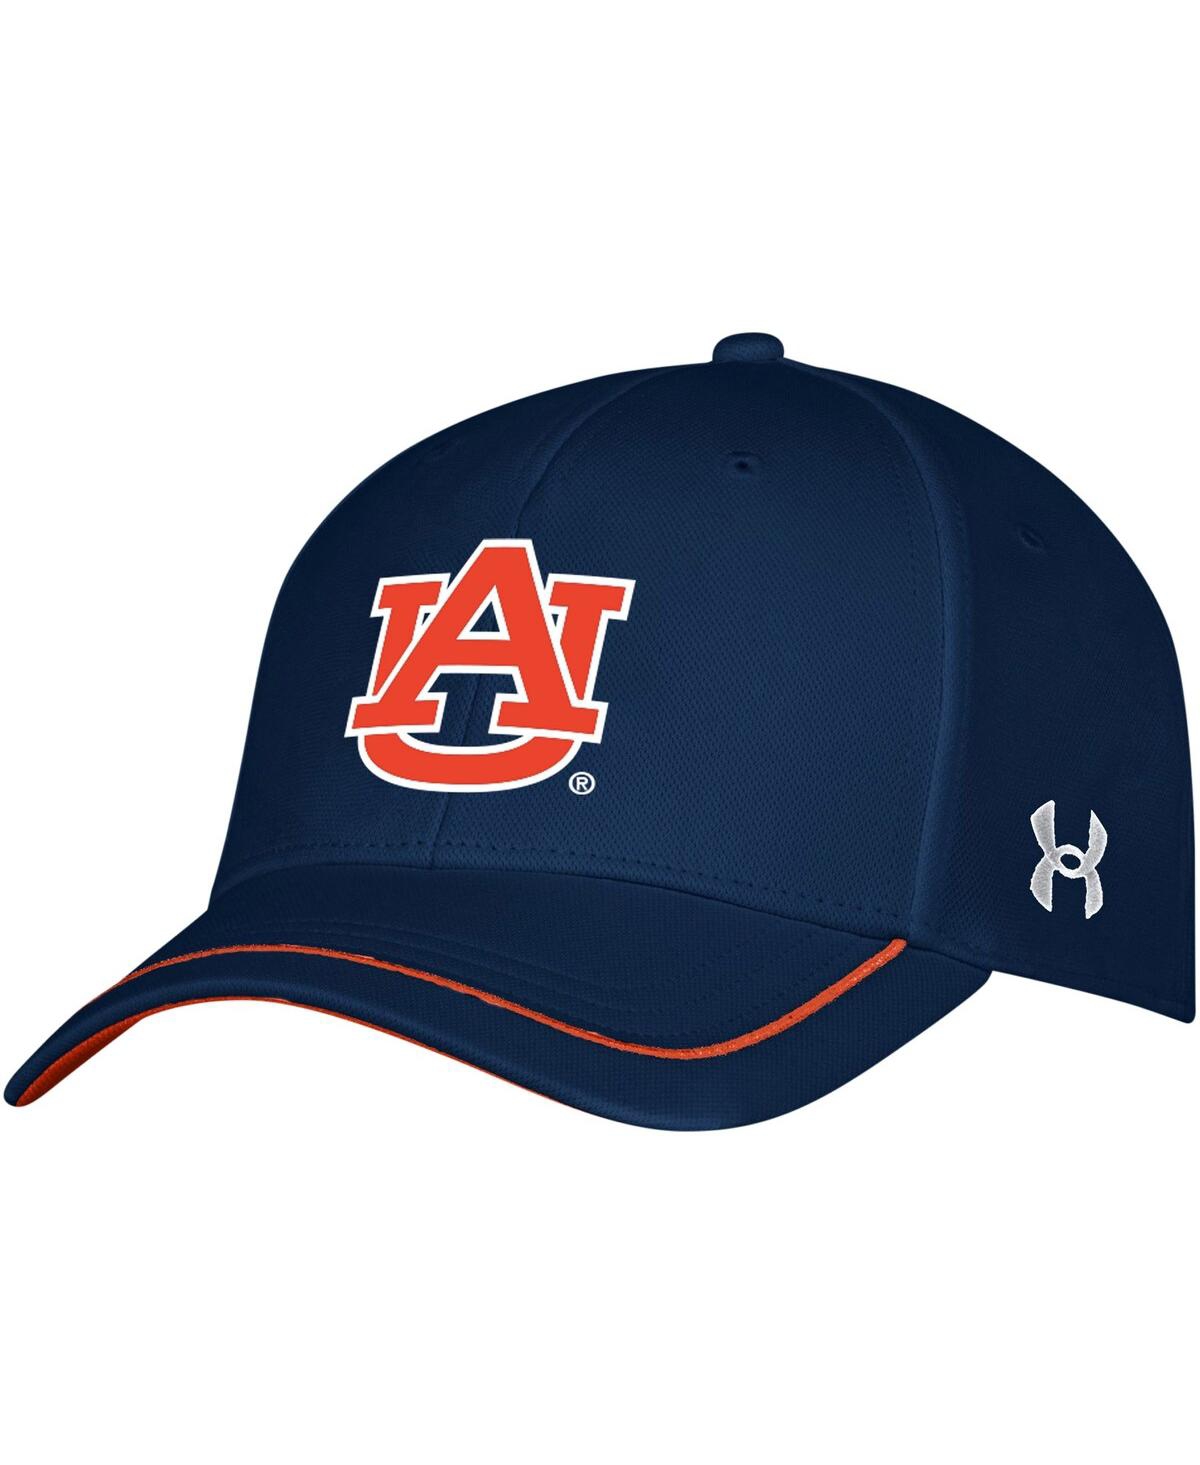 Under Armour Kids' Youth Boys And Girls  Navy Auburn Tigers Blitzing Accent Performance Adjustable Hat